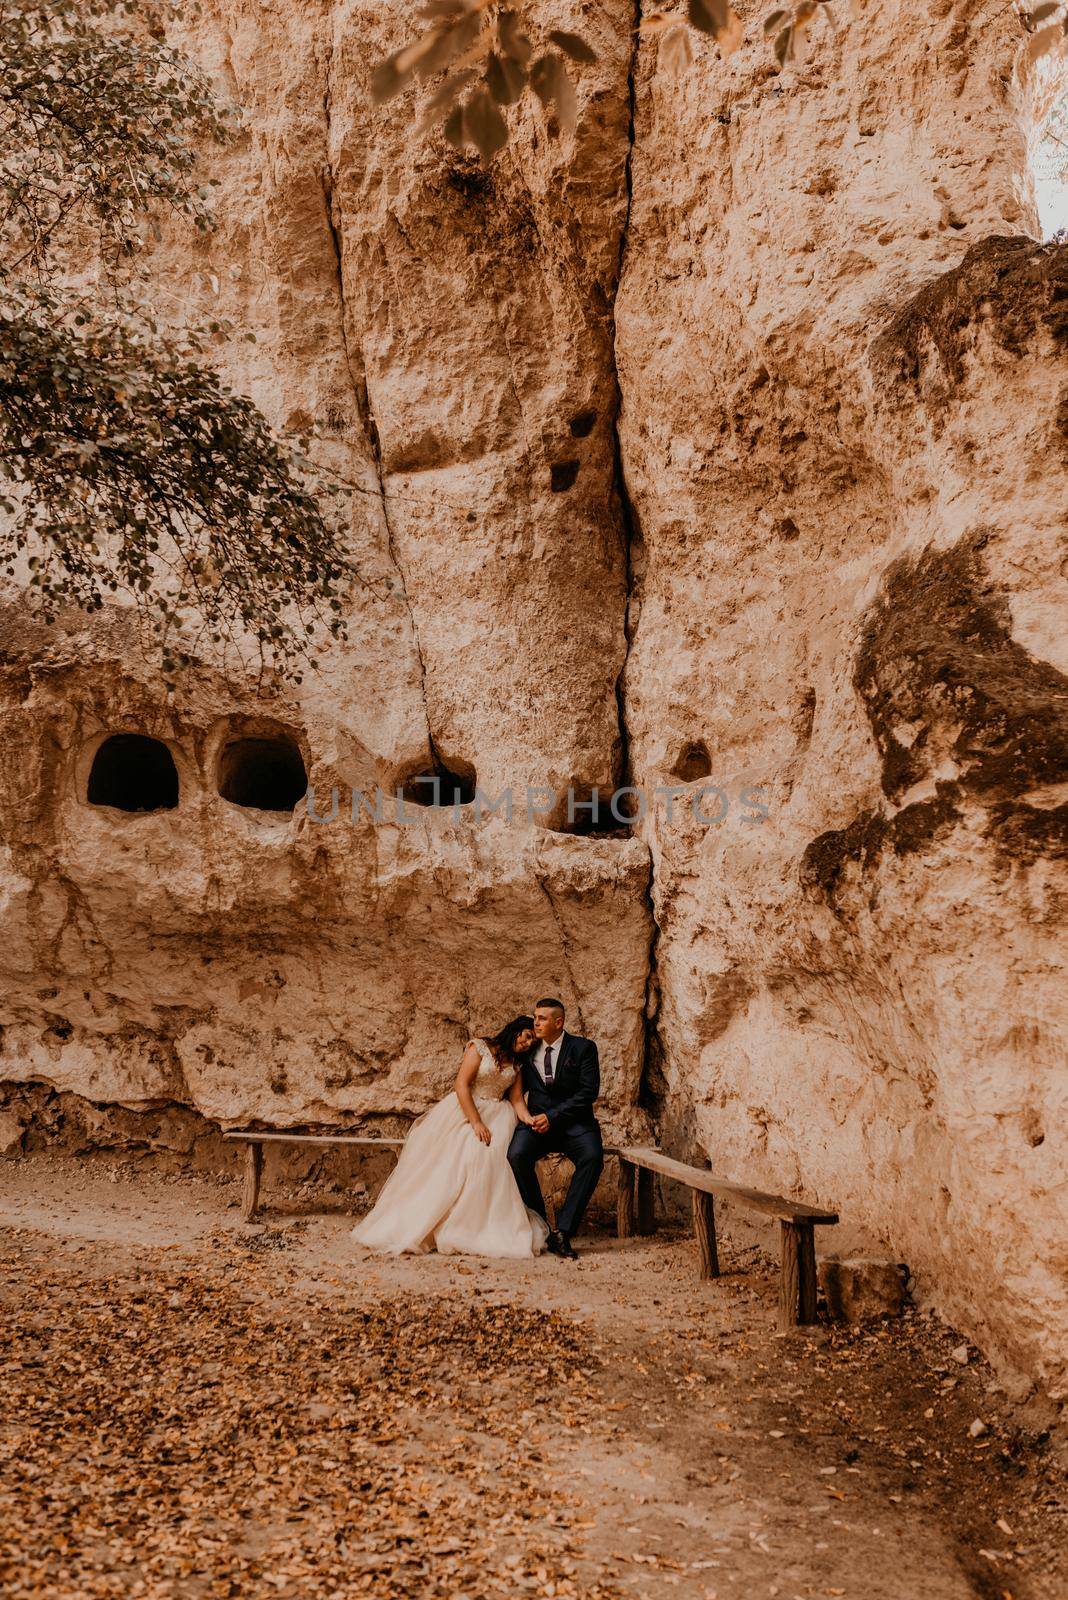 wedding couple in love man and woman sitting on a bench under rock monastery bakota in autumn forest against background of stone rocks. groom suit and bride dress with crown on head